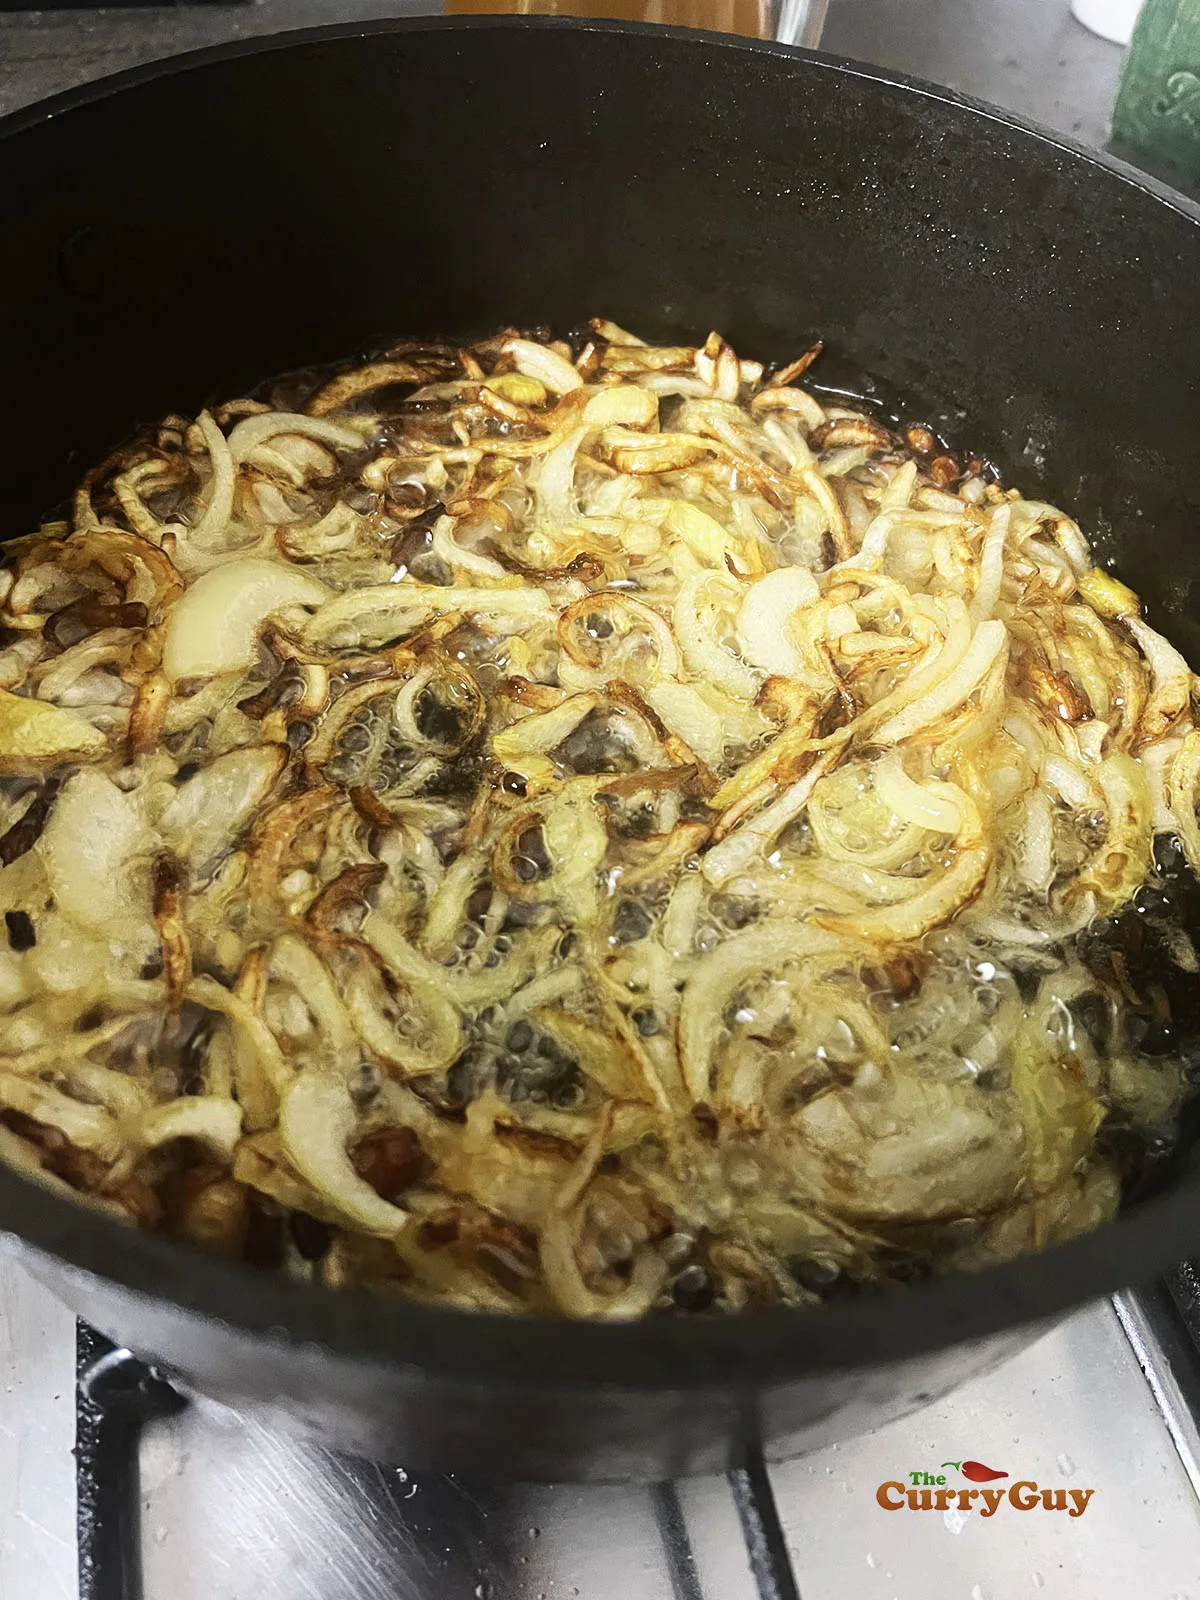 Frying onions for the marinade.